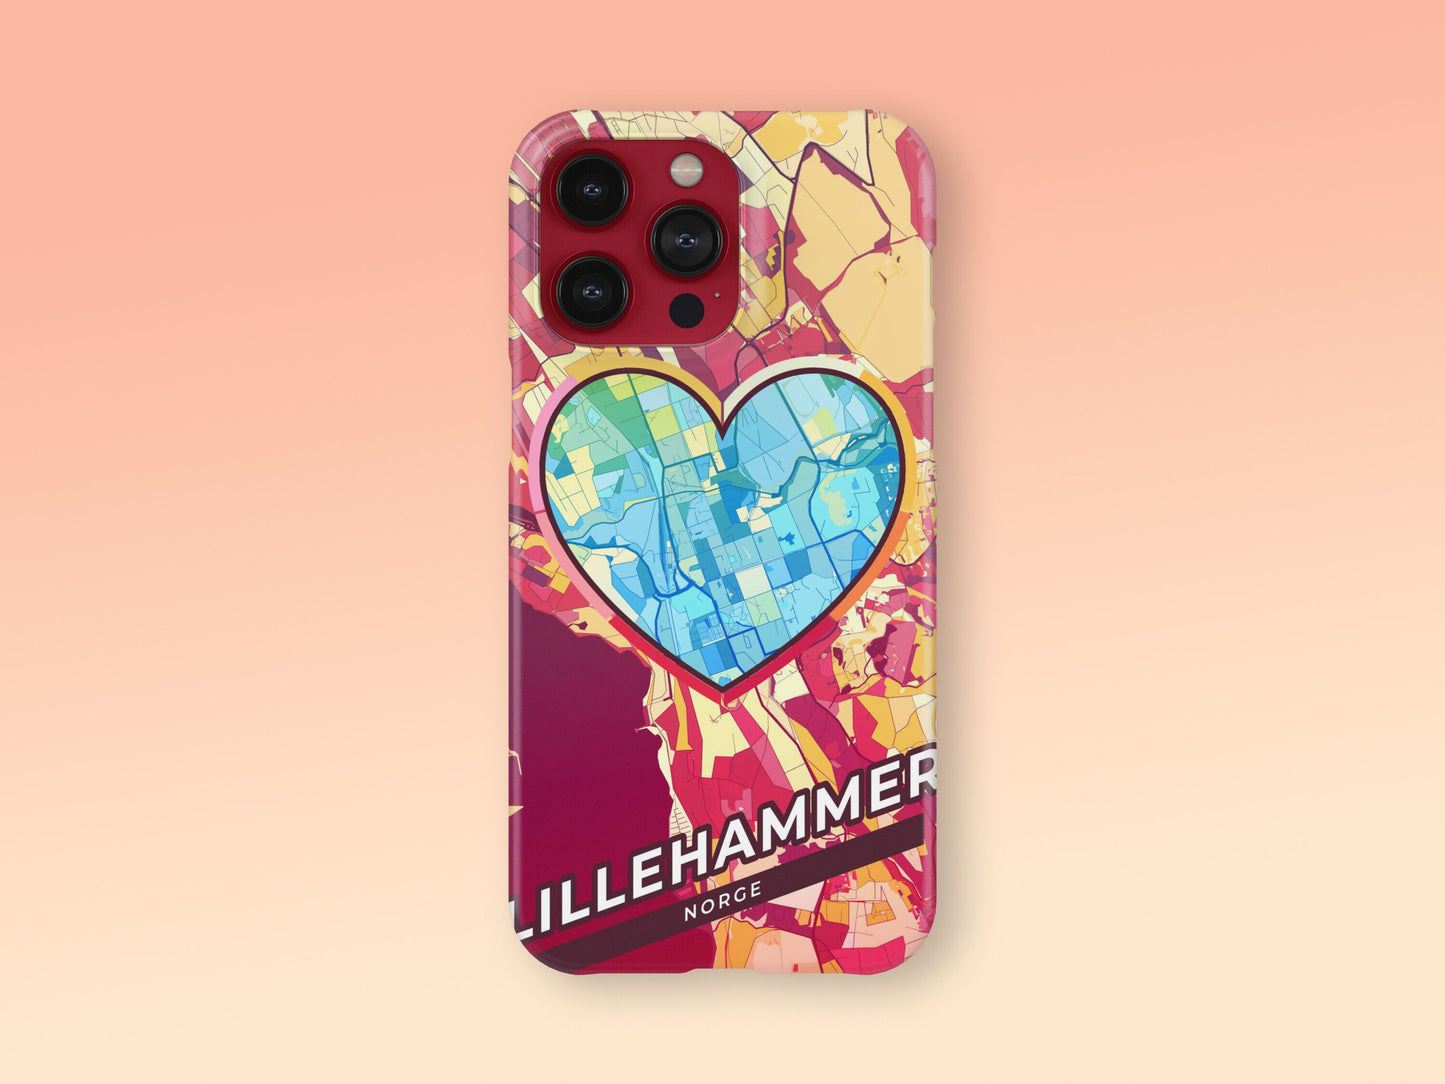 Lillehammer Norway slim phone case with colorful icon. Birthday, wedding or housewarming gift. Couple match cases. 2